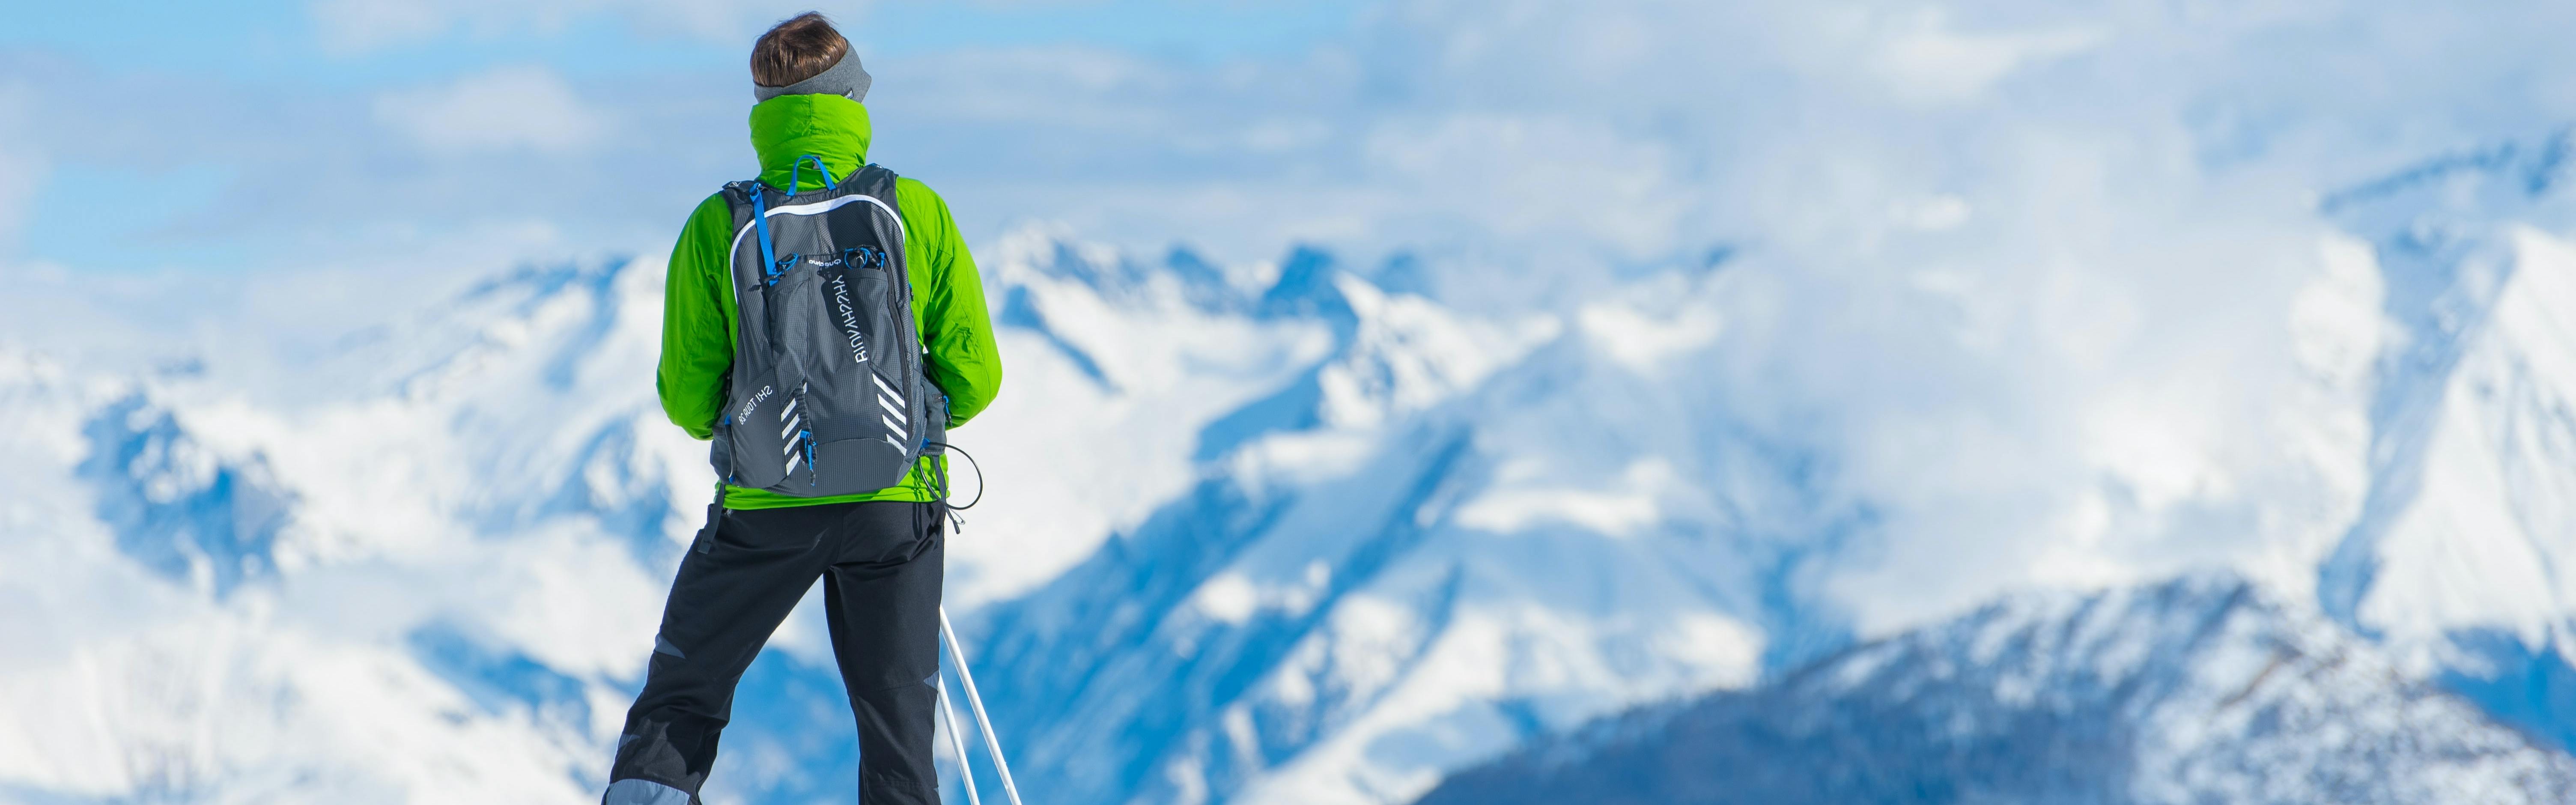 A skier wearing a green jacket and a grey backpack stands at the top of a ski pass. It is sunny and you can see a lot of snow covered peaks in the background.